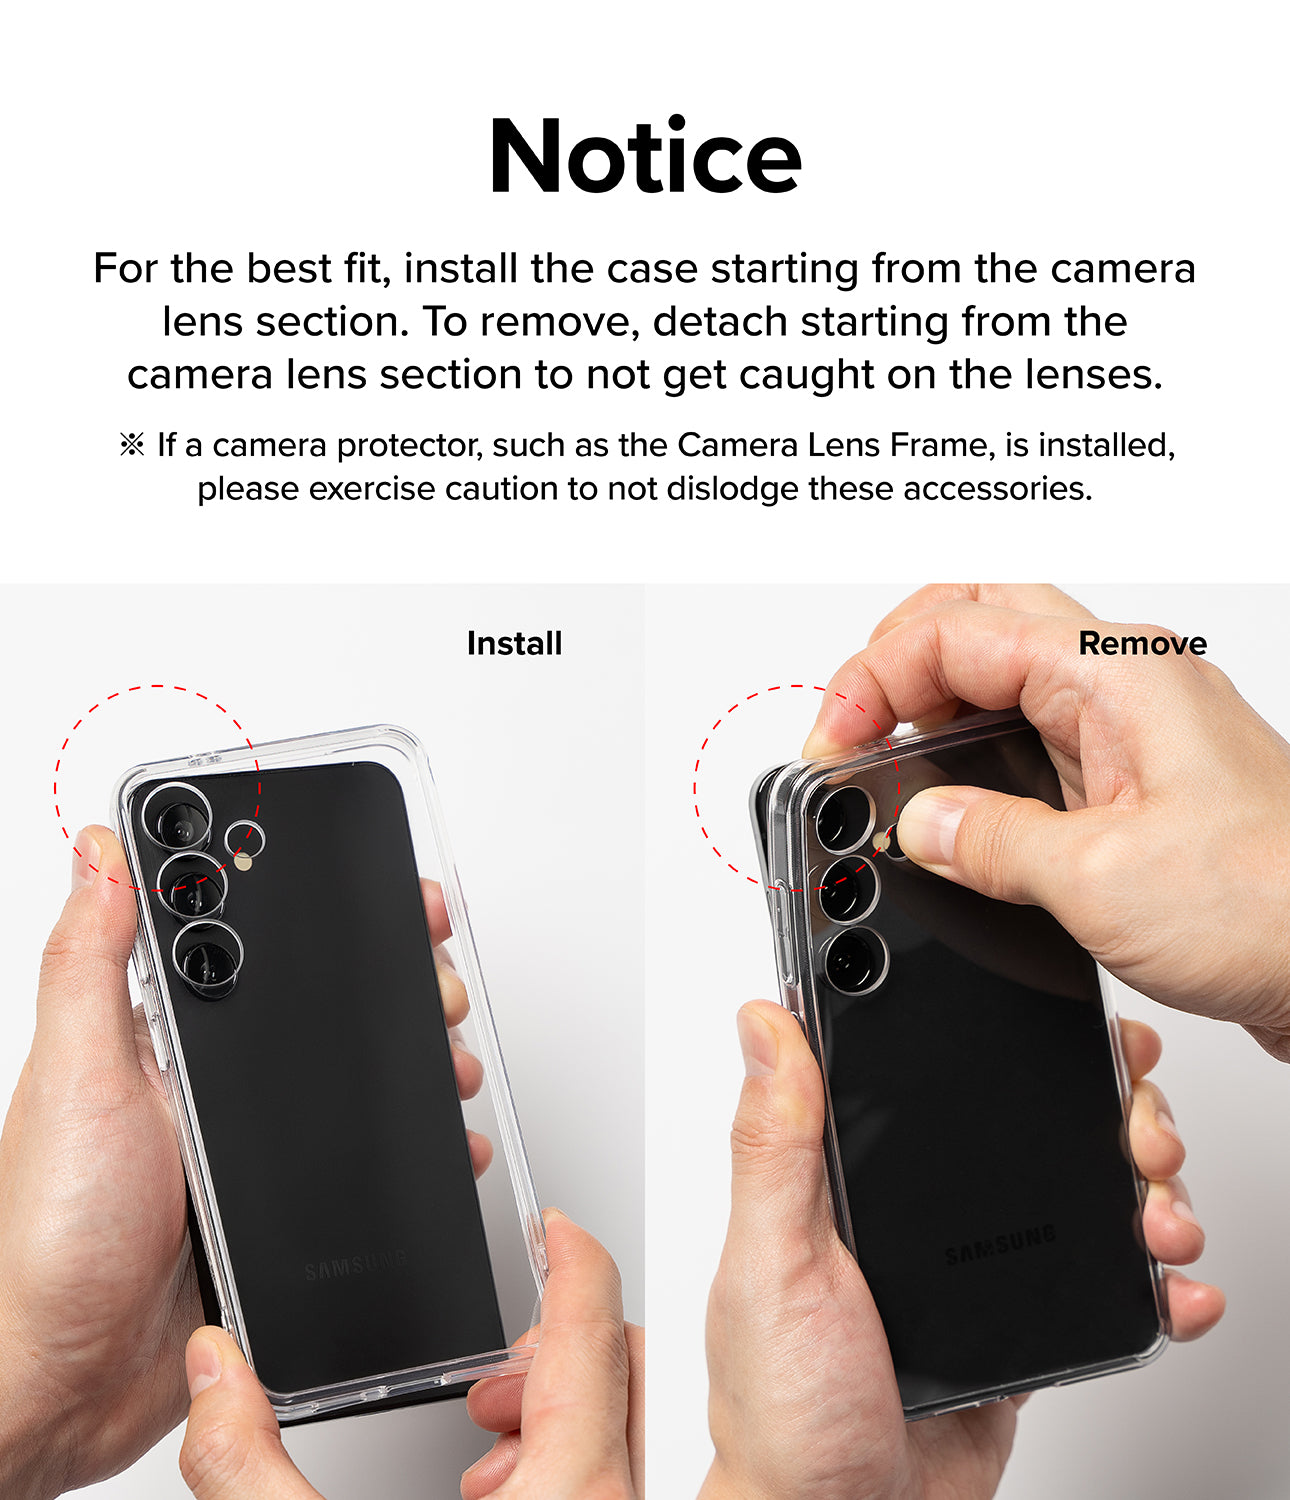 Galaxy S24 Ultra Case | Onyx - Dark Green - Notice. For the best fit, install the case starting from the camera lens section. To remove, detach starting from the camera lens section to not get caught on the lenses.